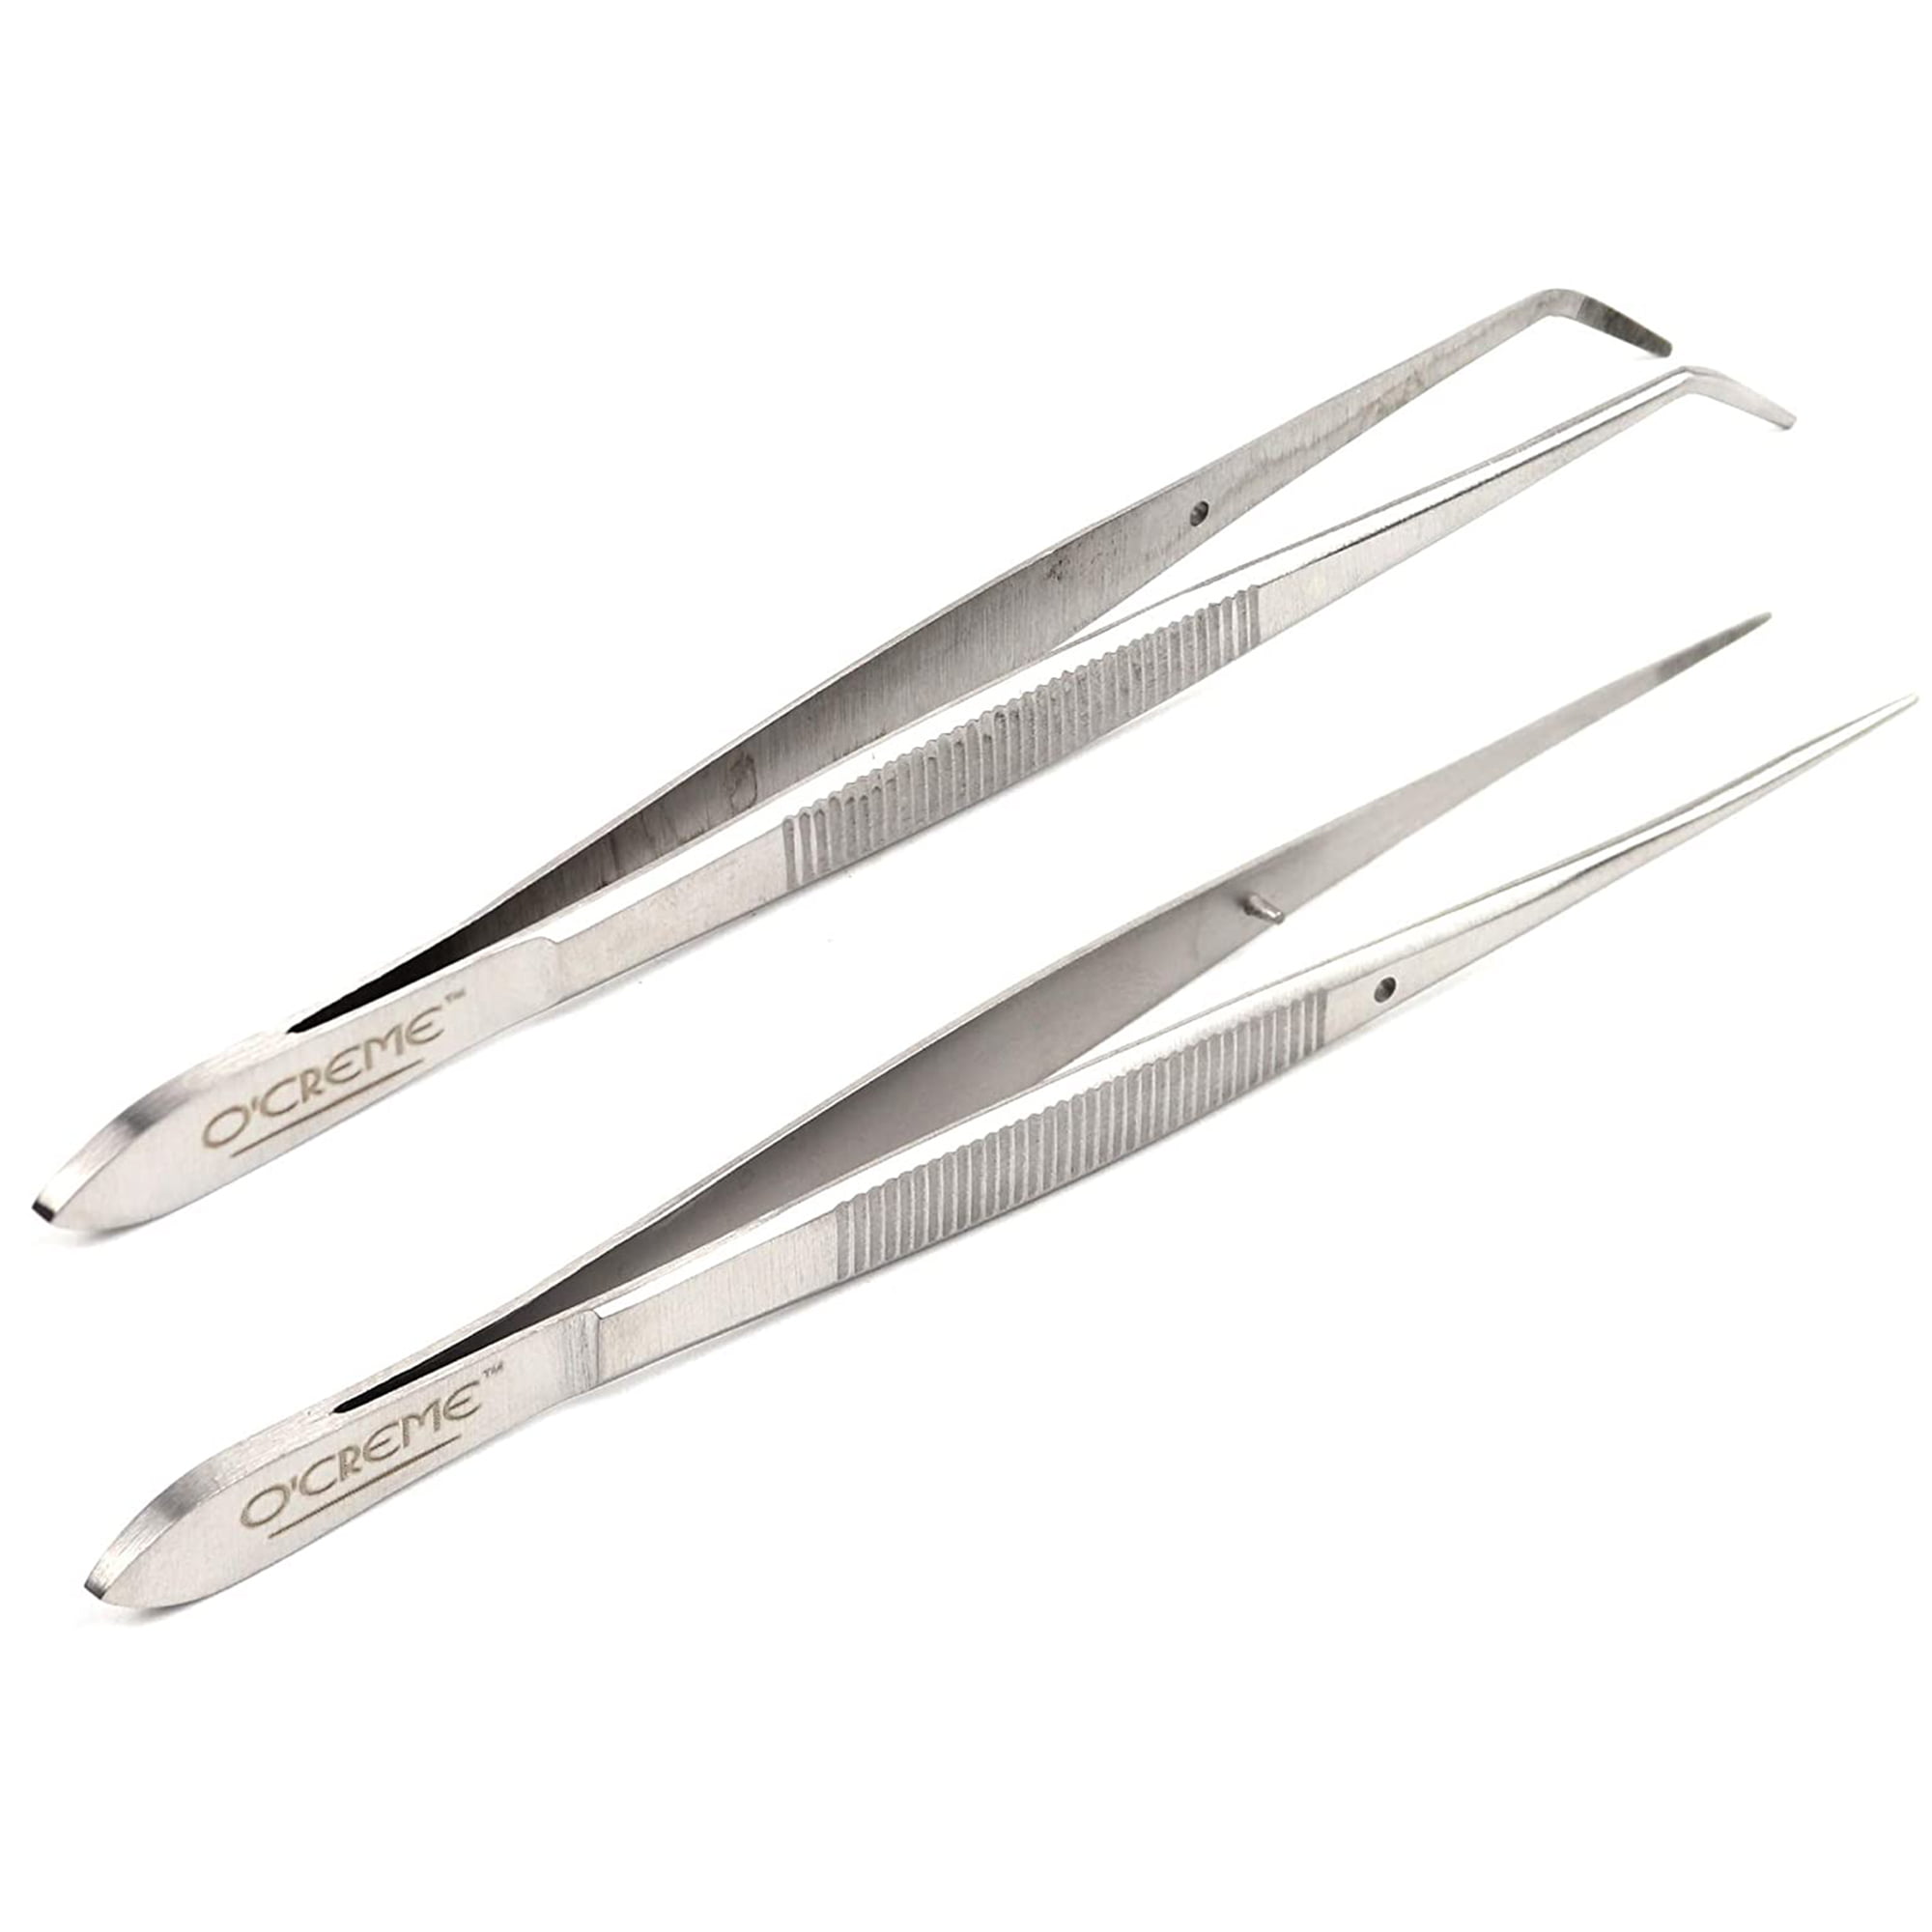 Tong Grasping Pickup Forceps Stainless 10" Feeding Tweezer Straight Serrated Tip 